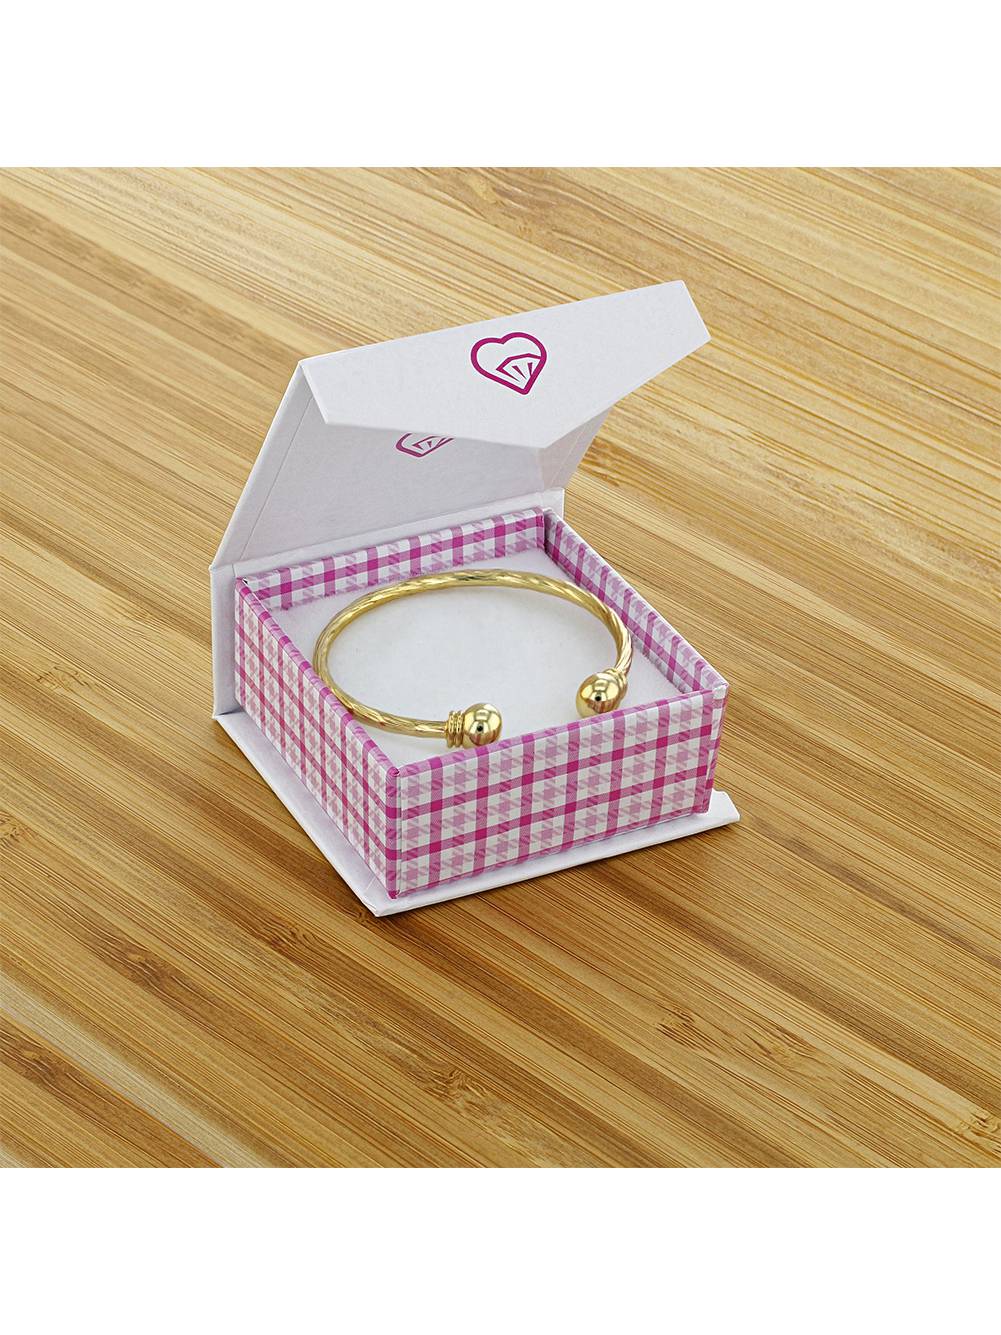 Shiny Yellow Gold Plated Adorable Twisted Cable Cuff Newborn Baby Bracelet 40mm - image 4 of 4